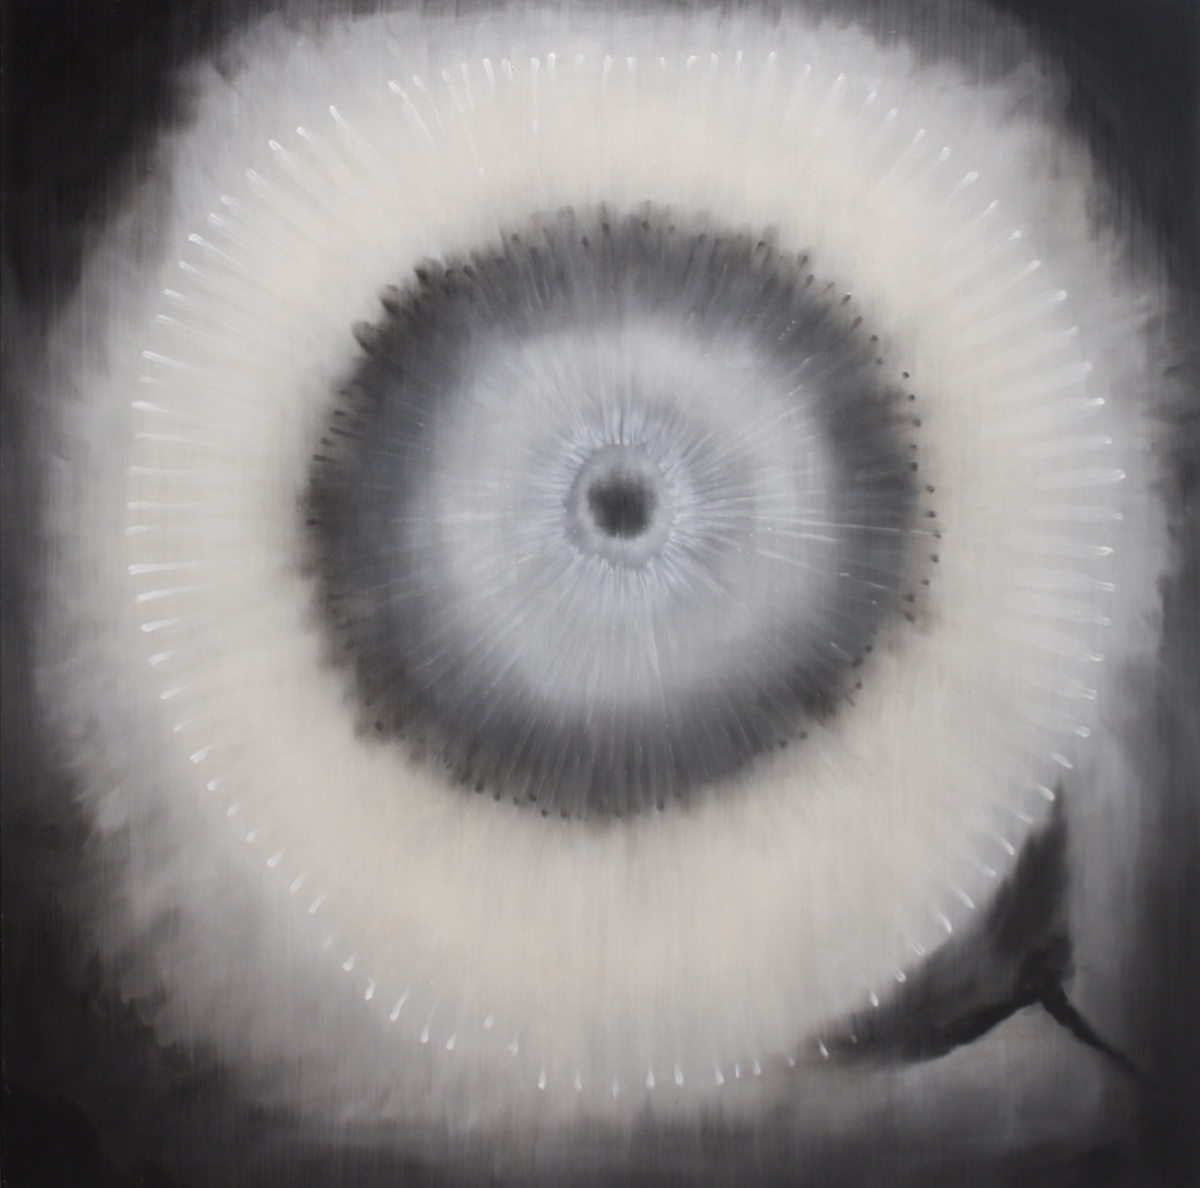 Ross Bleckner | Separated by a Curtain